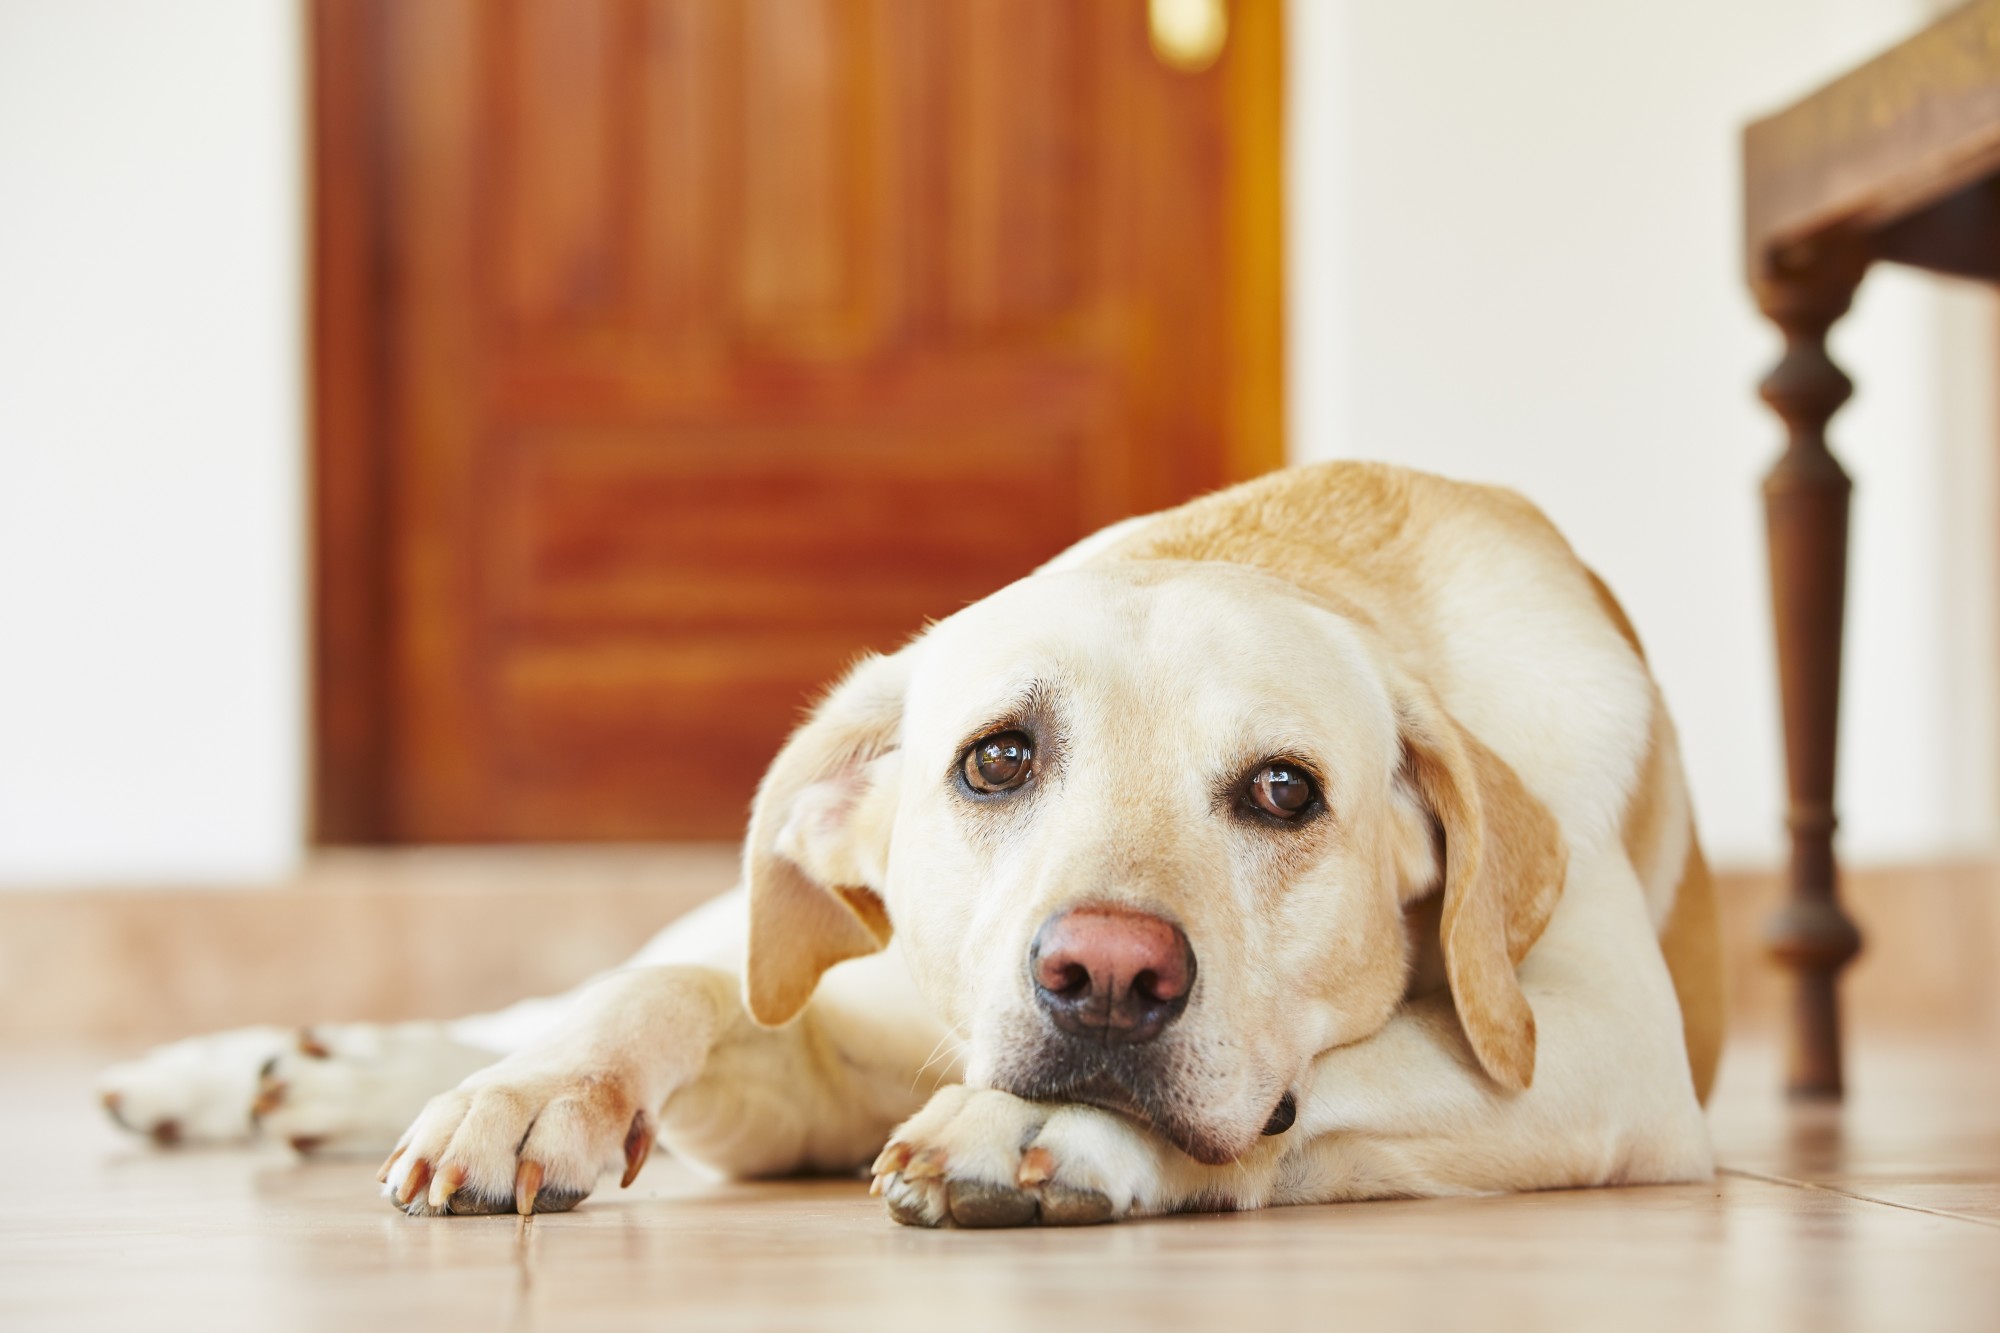 If you get ready to leave your house and notice your dog getting antsy, they might suffer from separation anxiety. Learn the symptoms of dog separation anxiety.